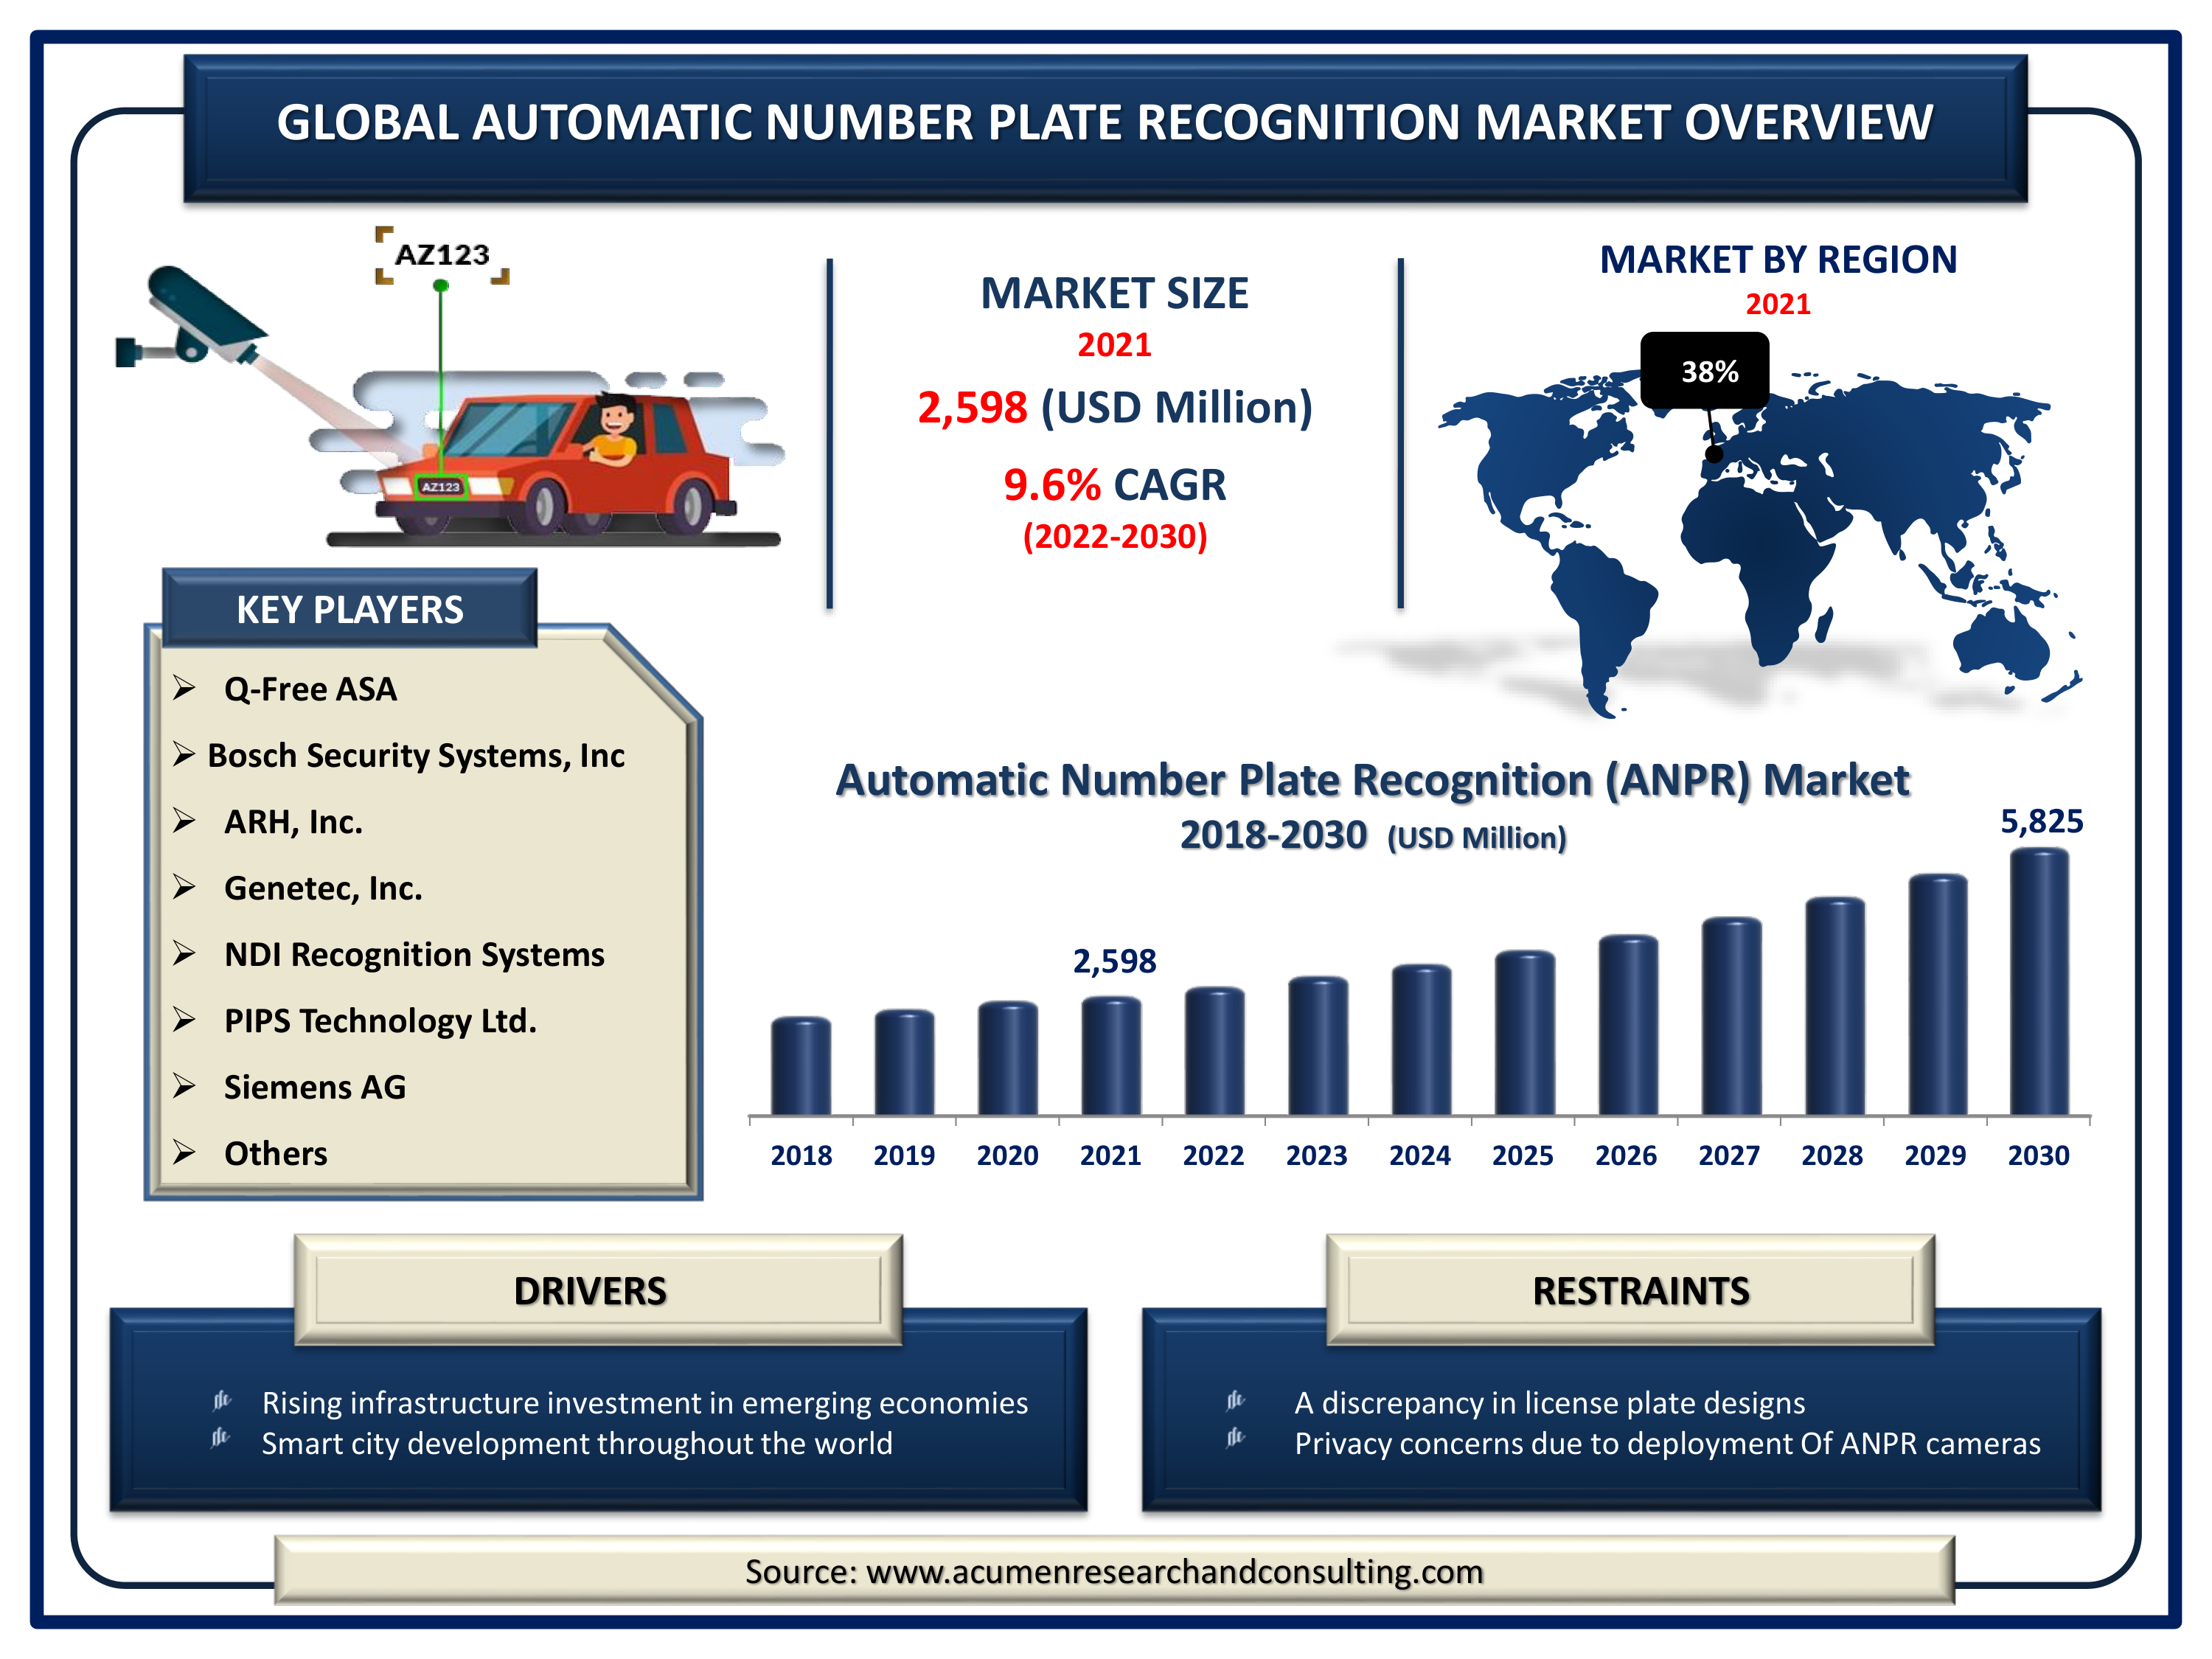 The Global Automatic Number Plate Recognition (ANPR) Market Size was valued at USD 2,598 Million in 2021 and is predicted to be worth USD 5,825 Million by 2030, with a CAGR of 9.6% from 2022 to 2030.